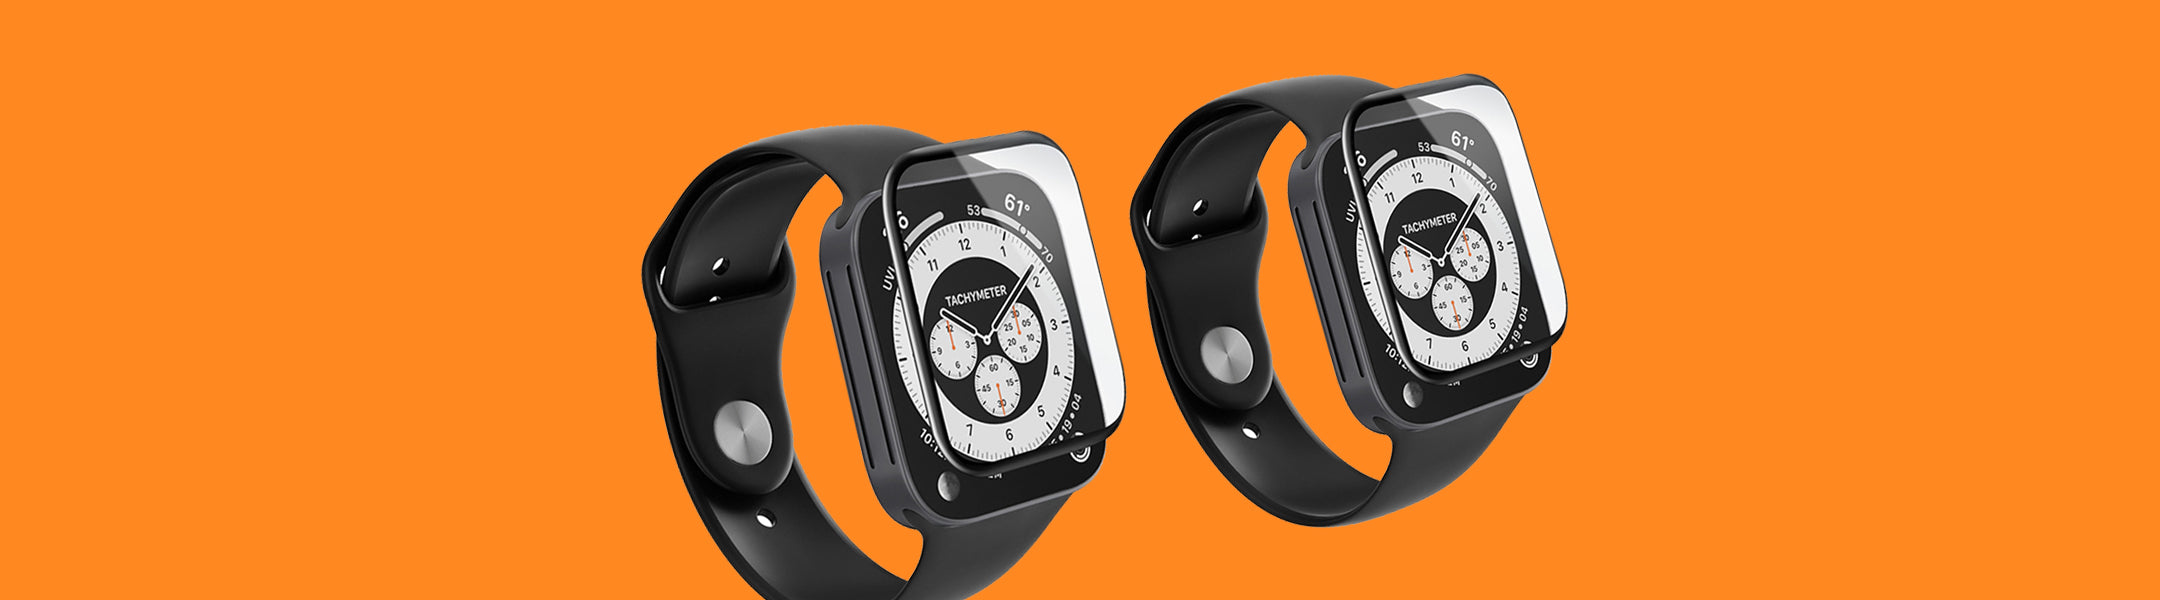 APPLE WATCH DEVICES